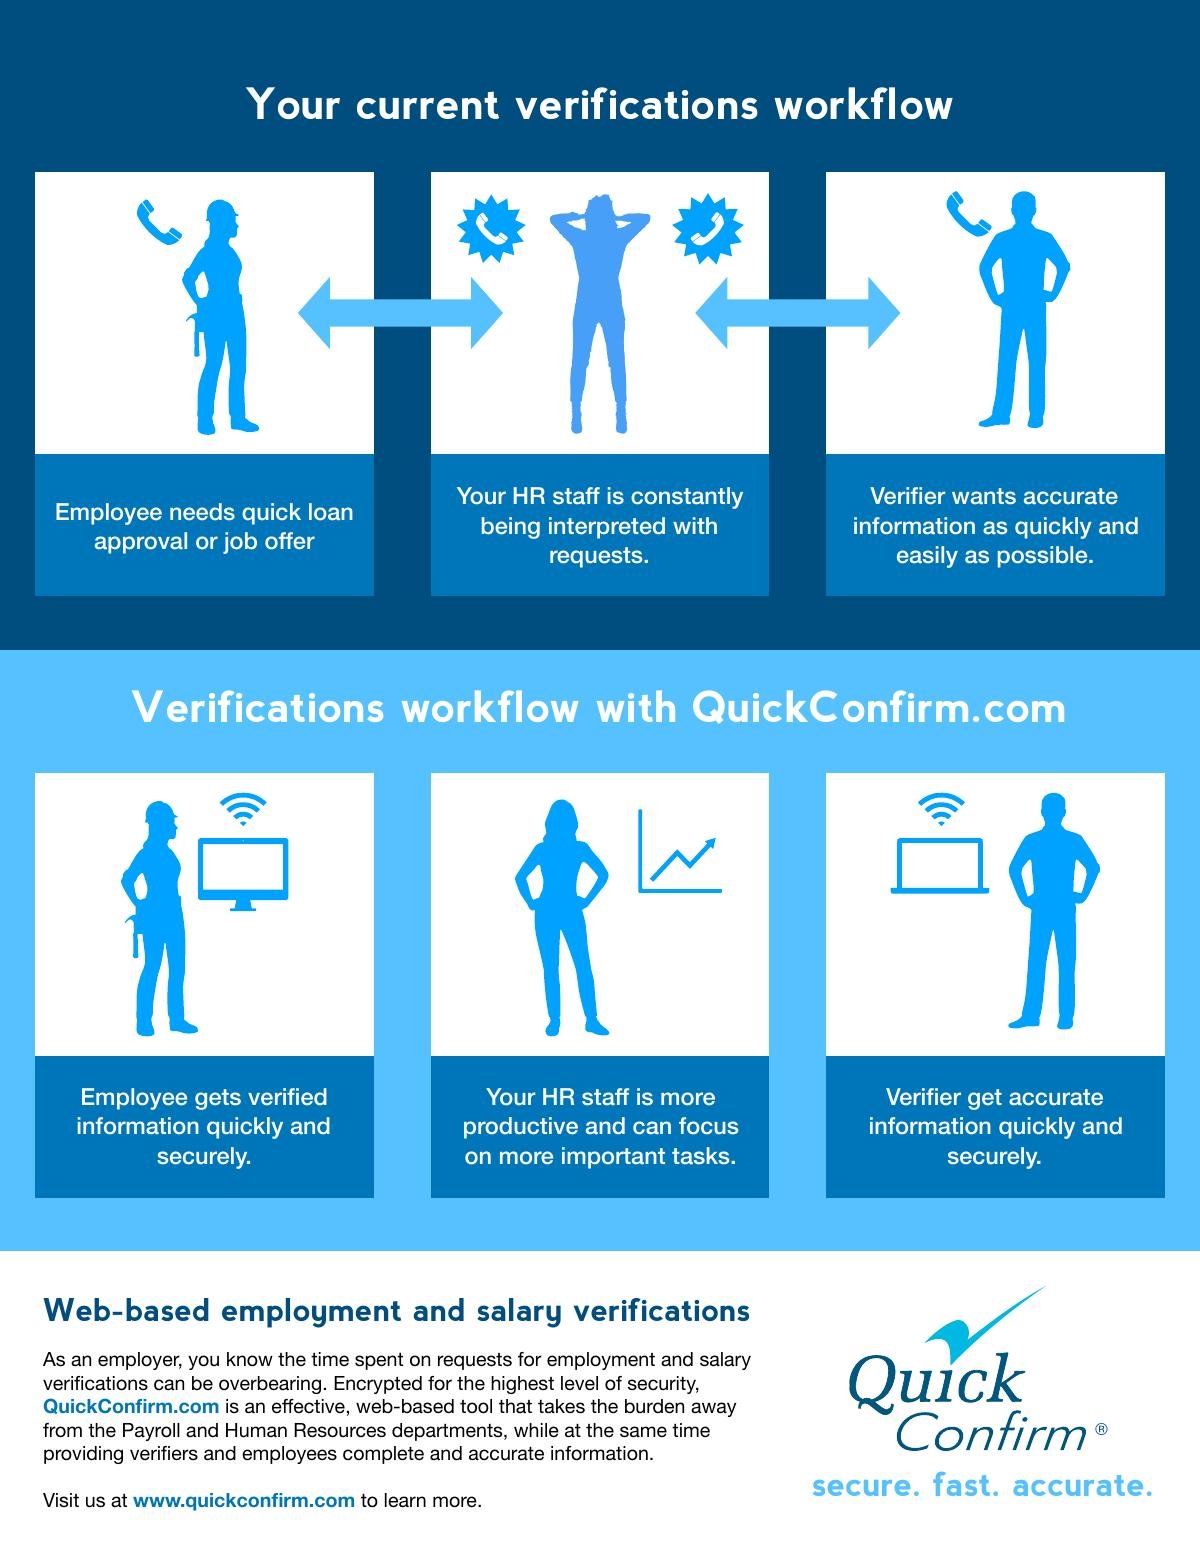 Verifications Workflow with QuickConfirm